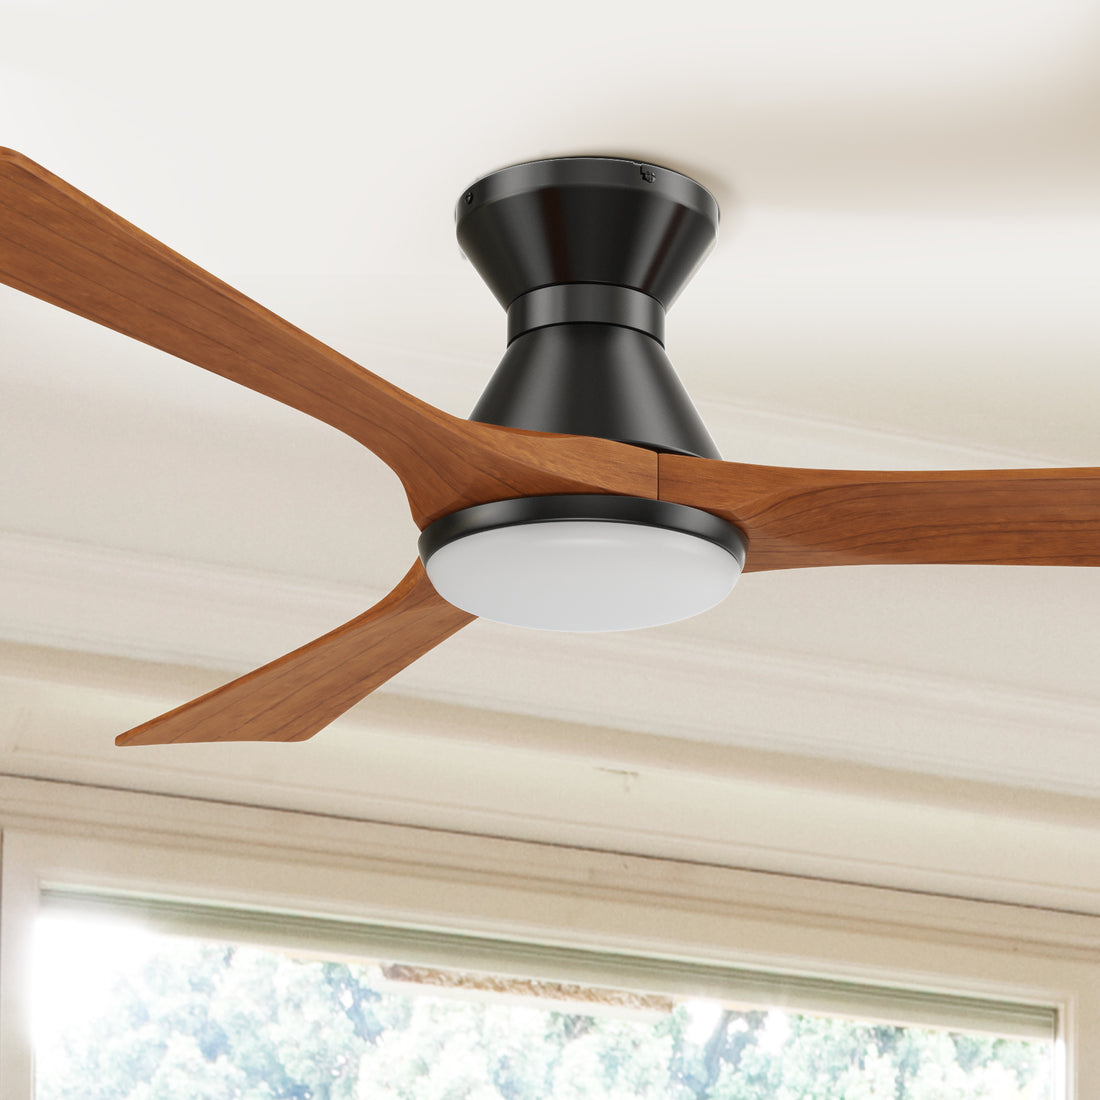 Carro Antrim 52 inch smart ceiling fan with light designs with black finish, use elegant solid wood blades and has an integrated 4000K LED daylight. 